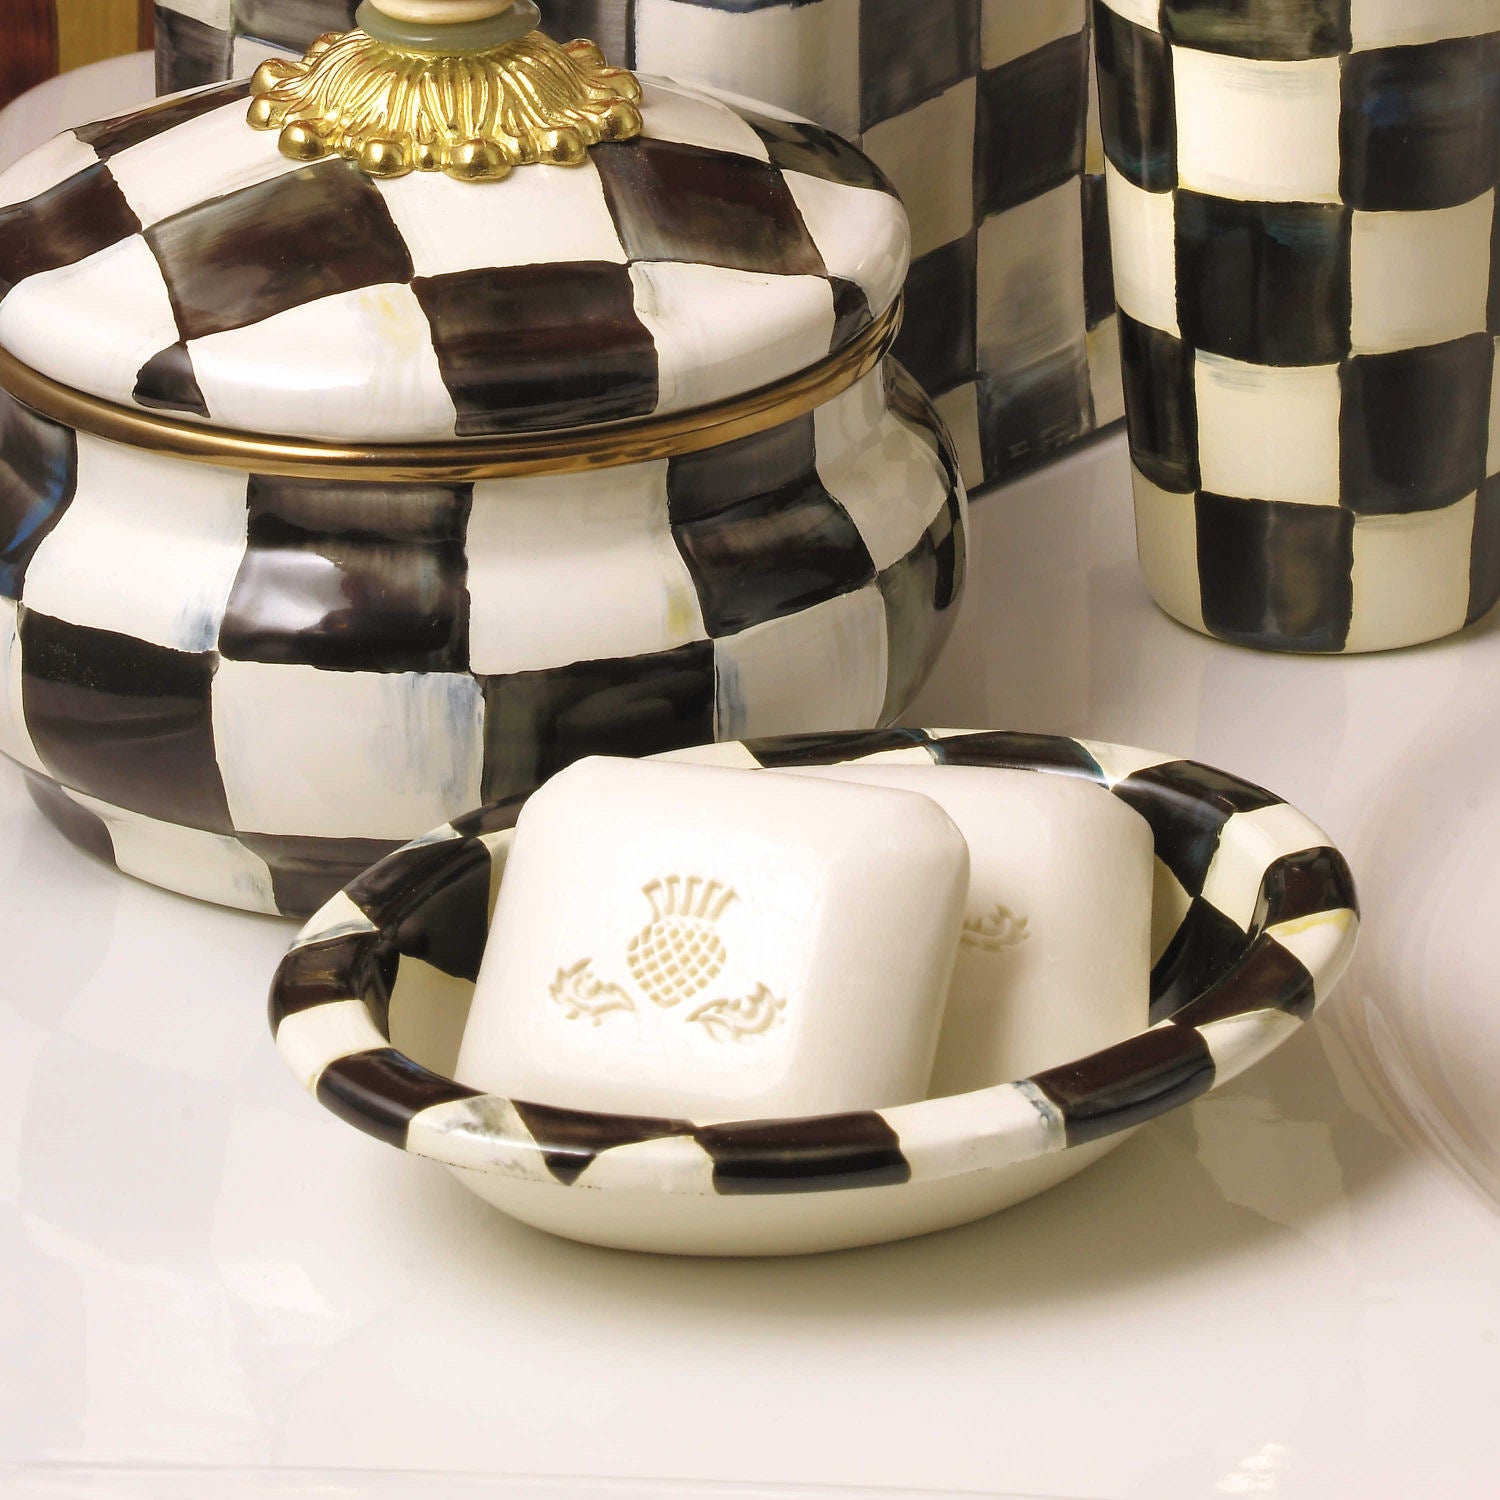 Courtly Check Soap Dish by Mackenzie-Childs - |VESIMI Design|